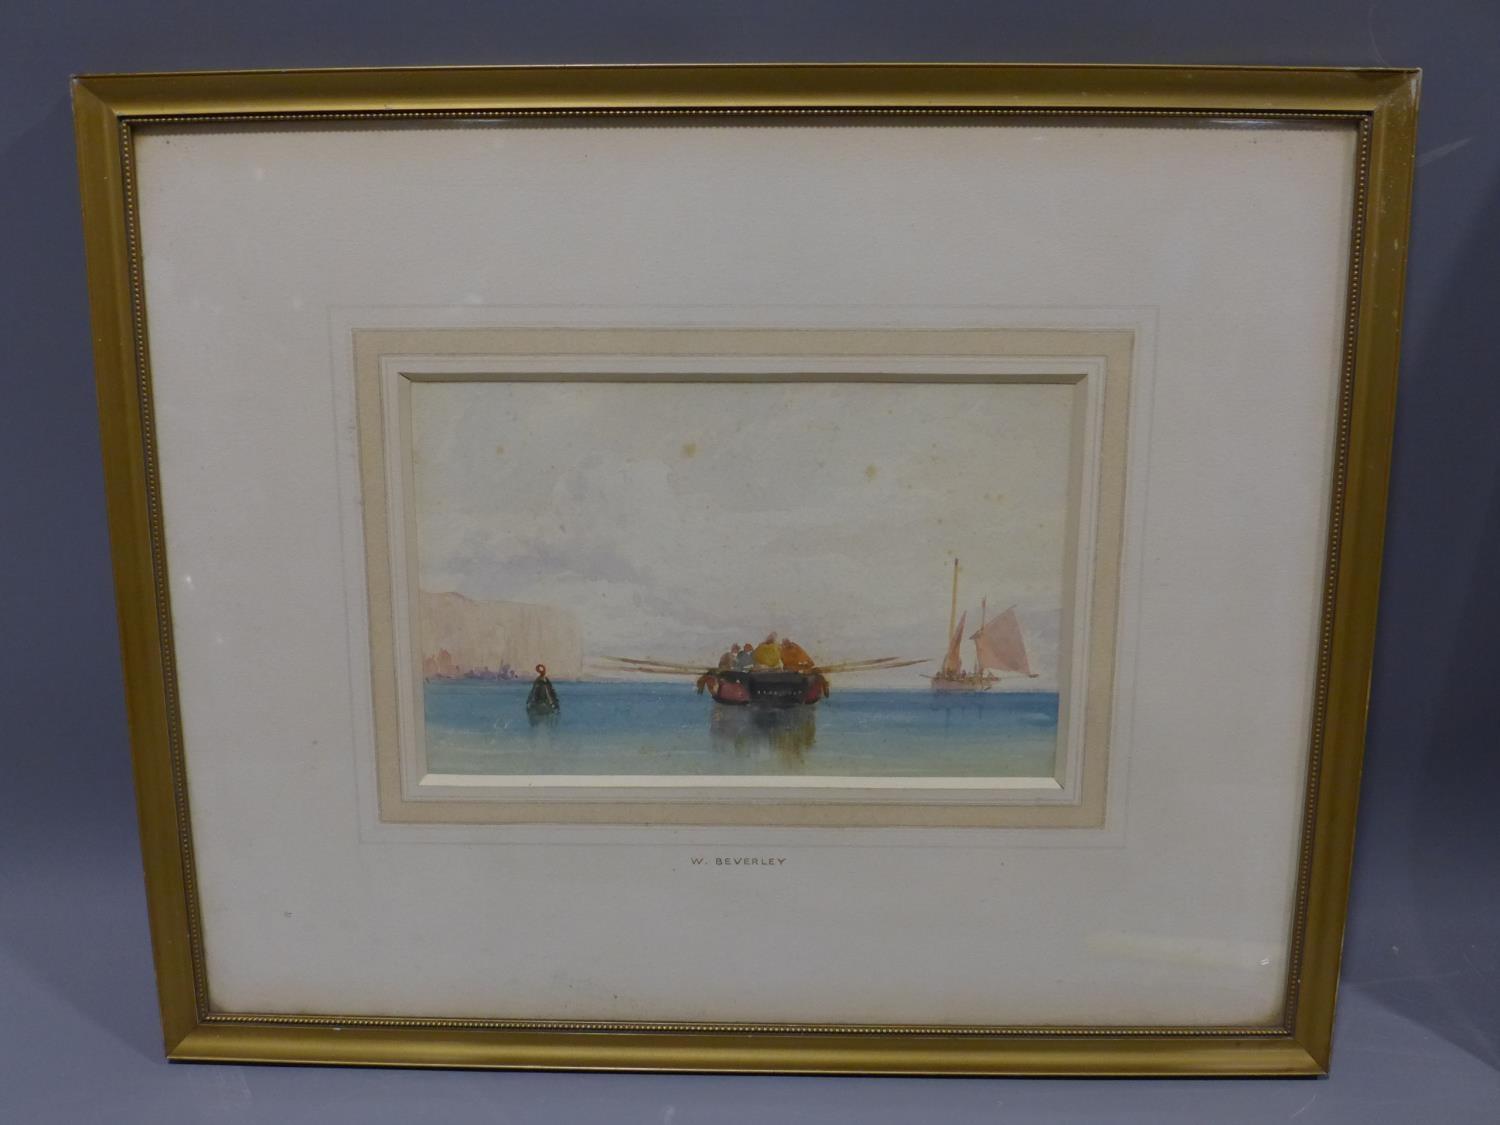 Attributed to William Roxby Beverly (British, 1811-1889), A rowing boat heading out to sea with a - Image 2 of 3